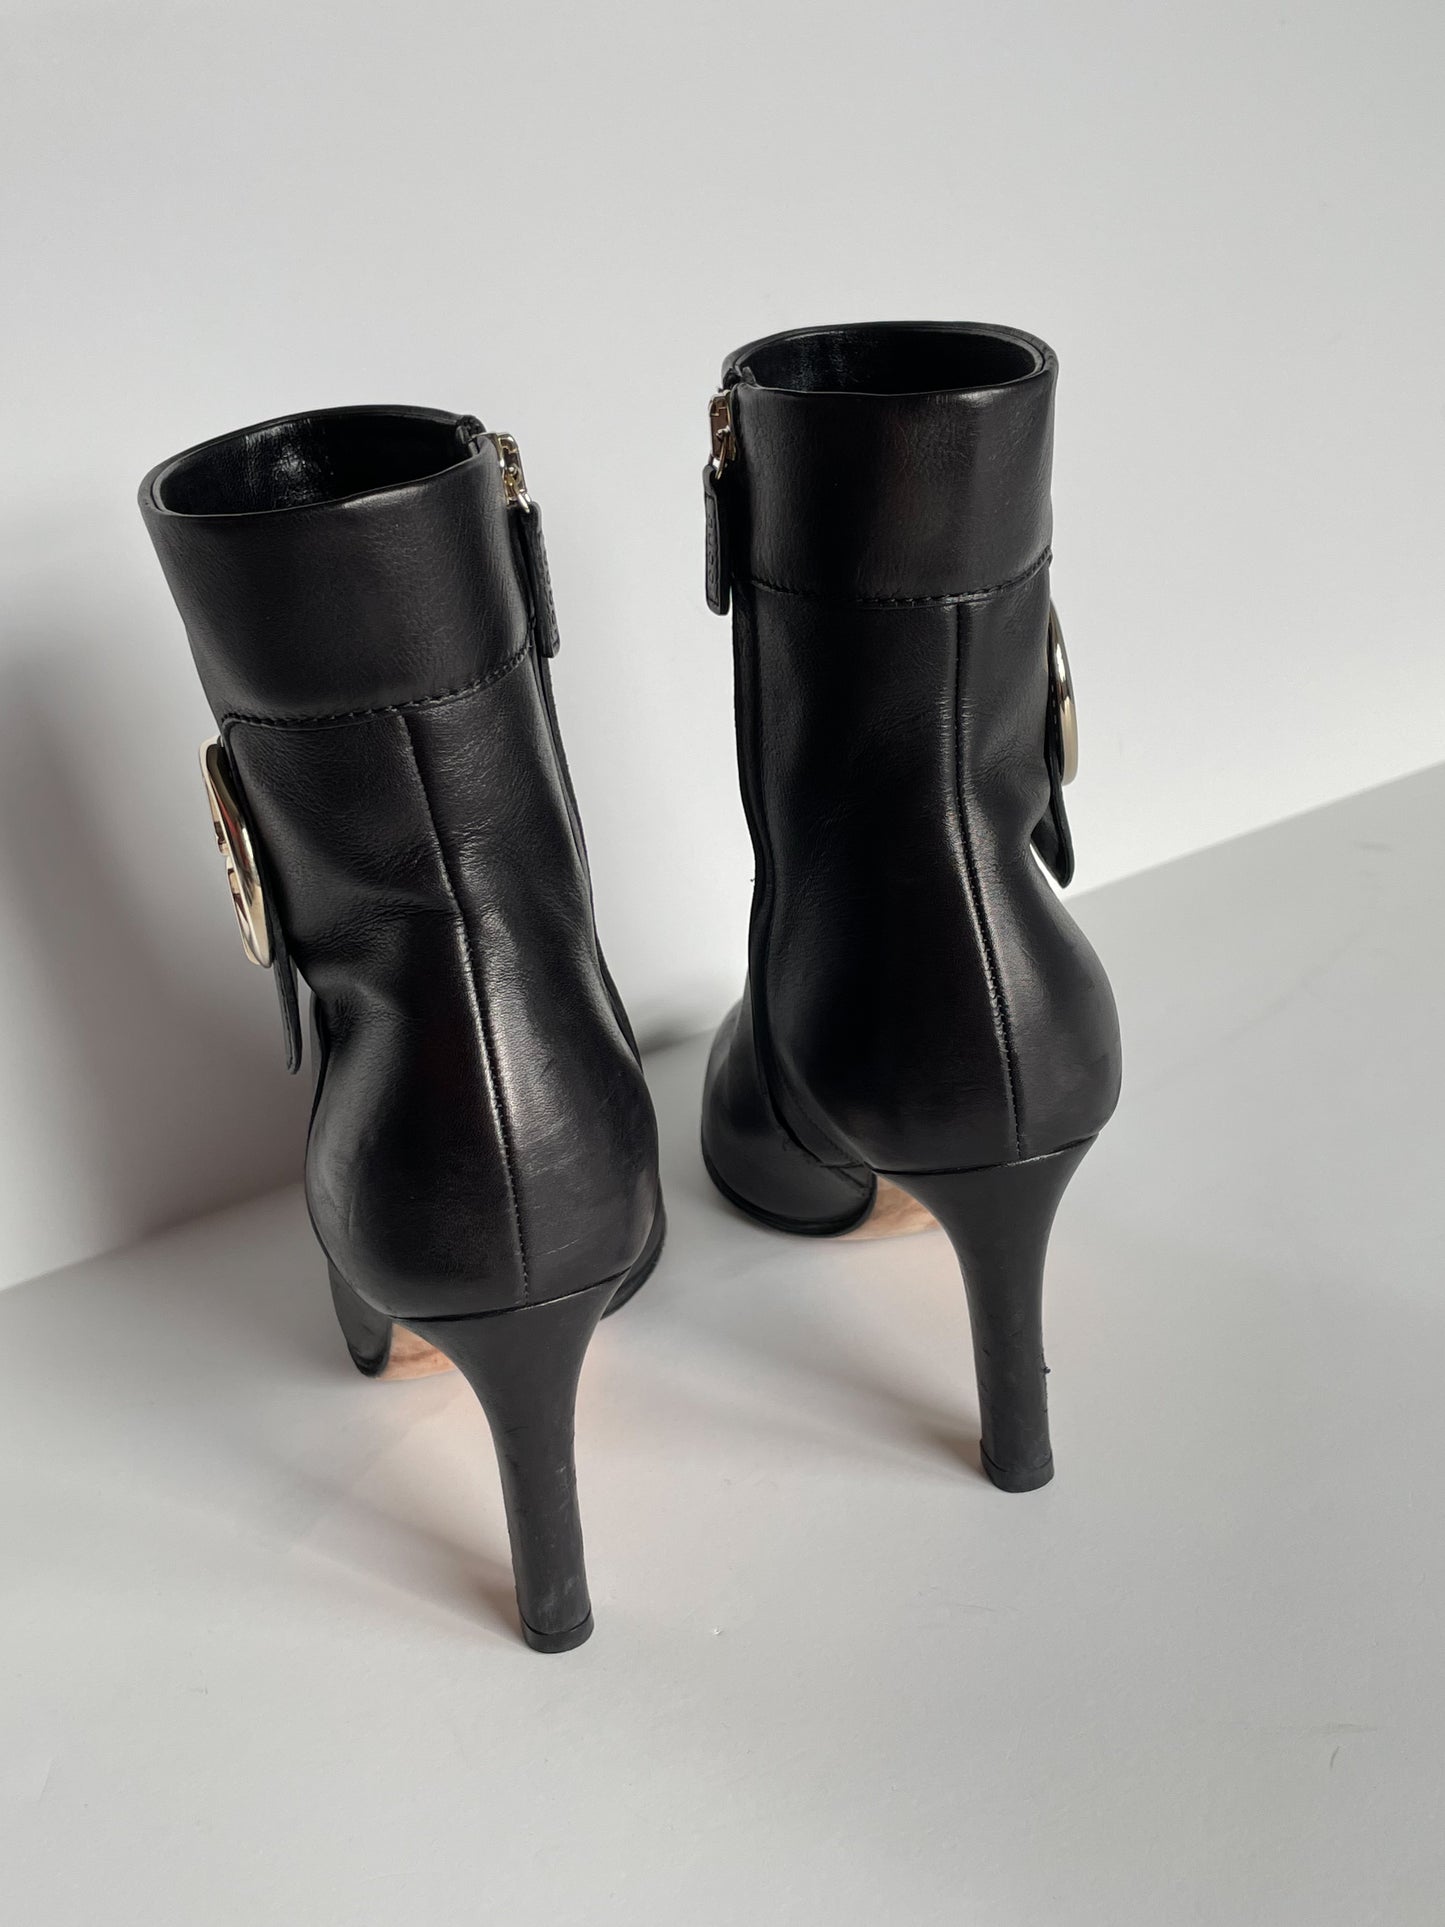 GUCCI Black Leather Ankle Boot Heel - Size 35